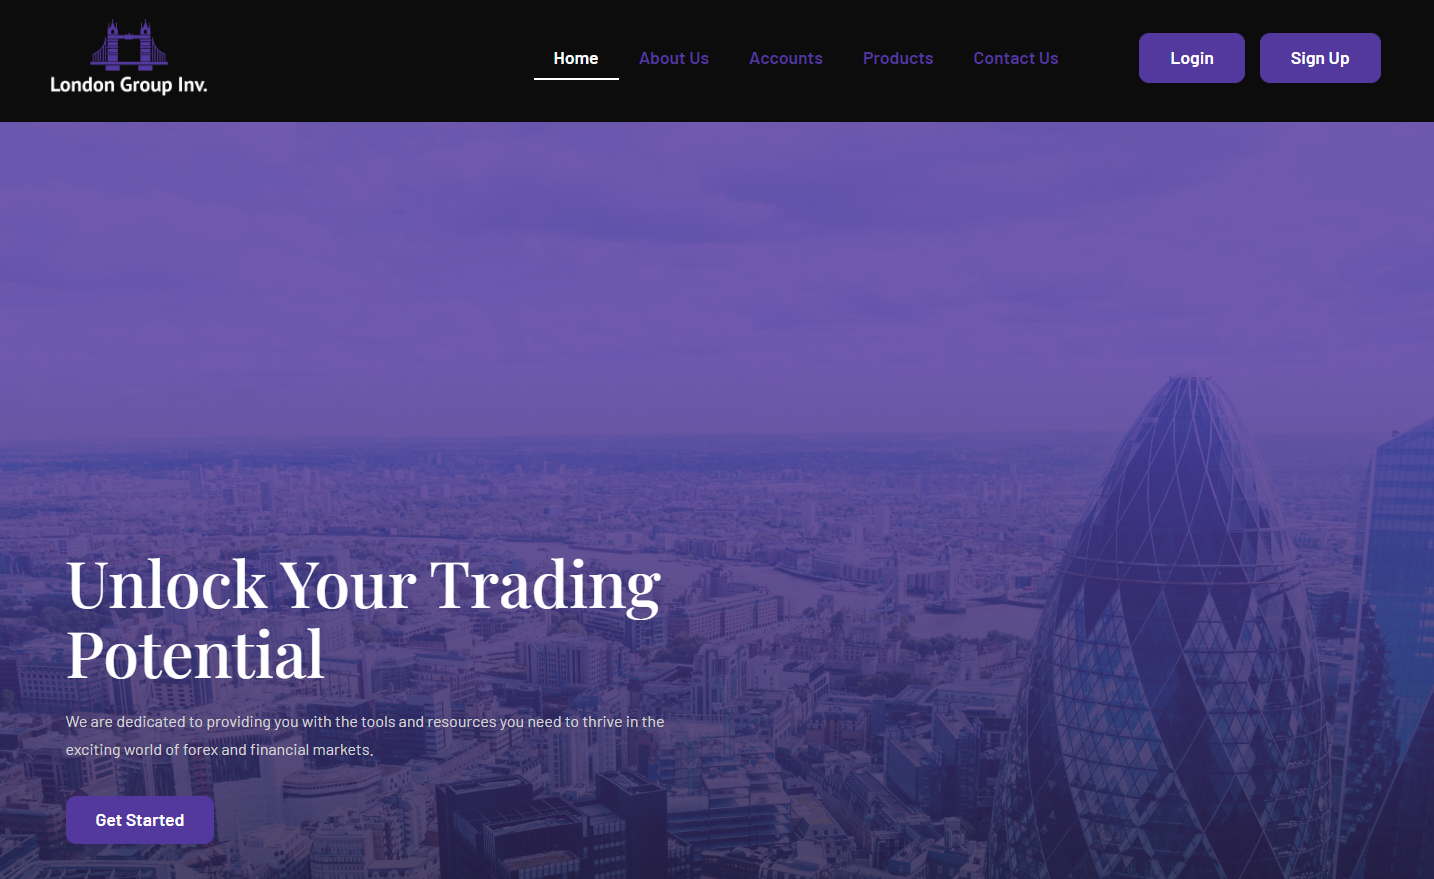 London Group Inv. online trading brand